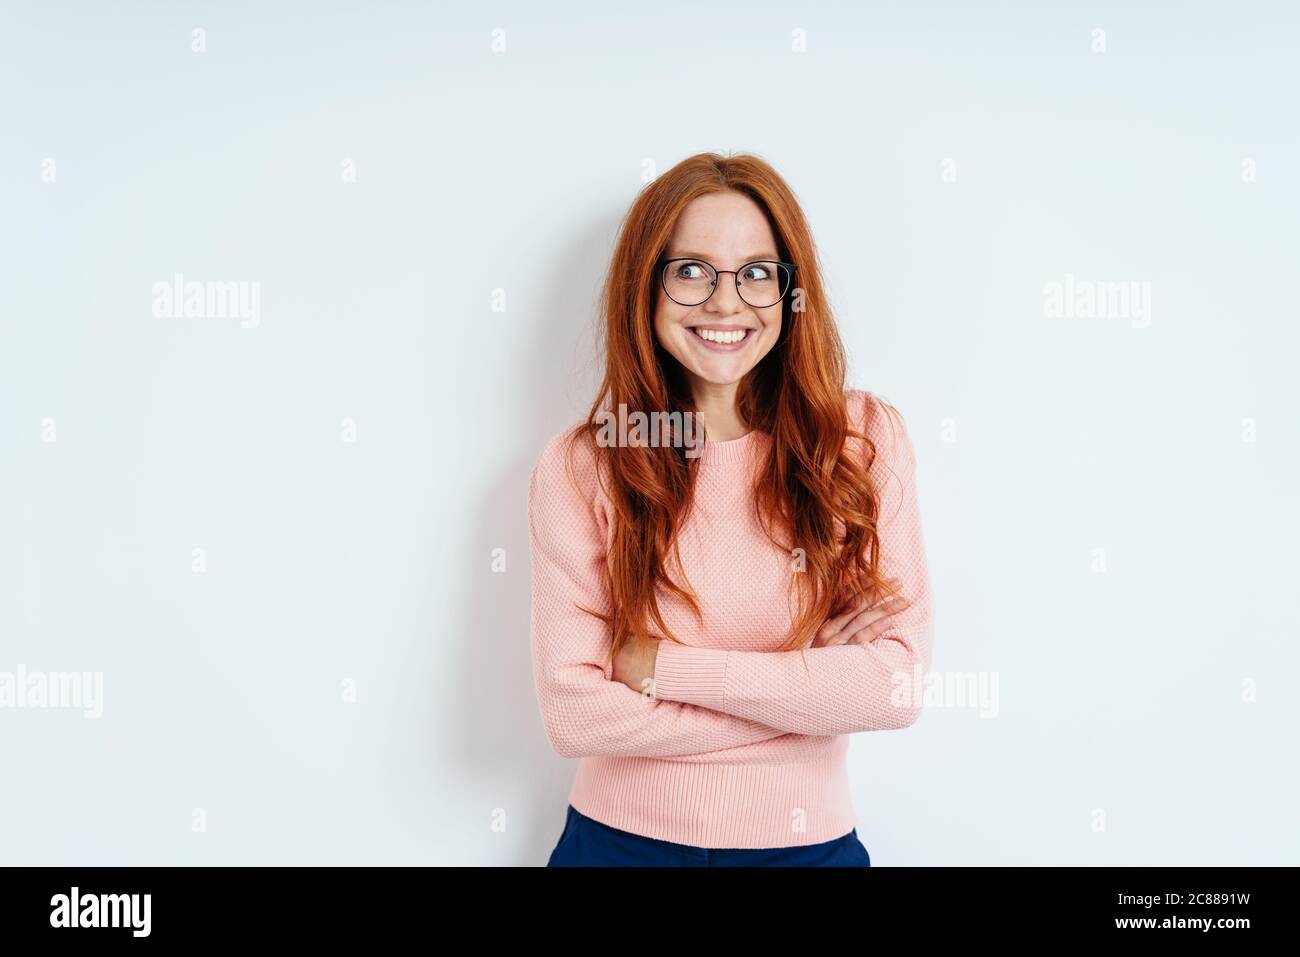 Gleeful young woman looking aside in anticipation with an eager expression and folded arms against a white interior wall with copy space Stock Photo